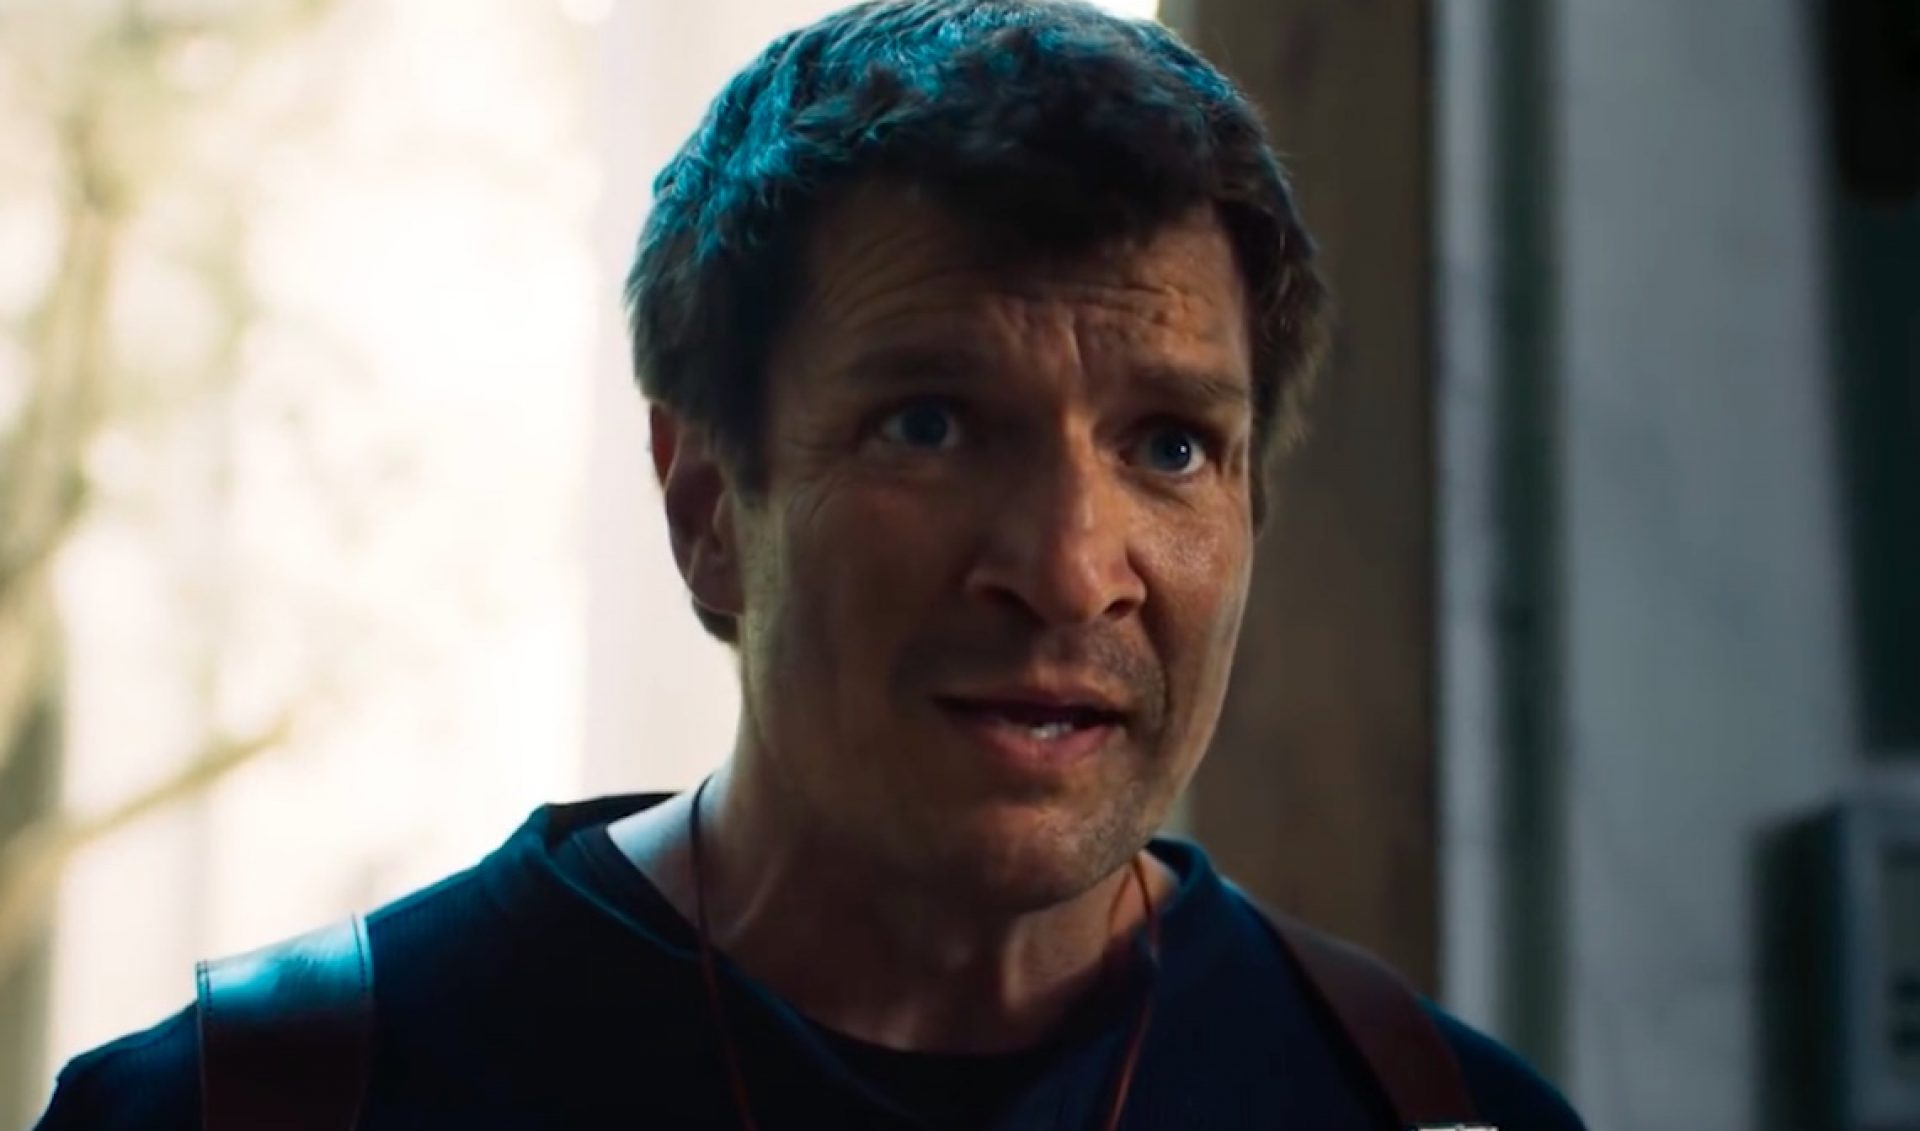 Actor Nathan Fillion Just Created A YouTube Fan Film Of Video Game ‘Uncharted’